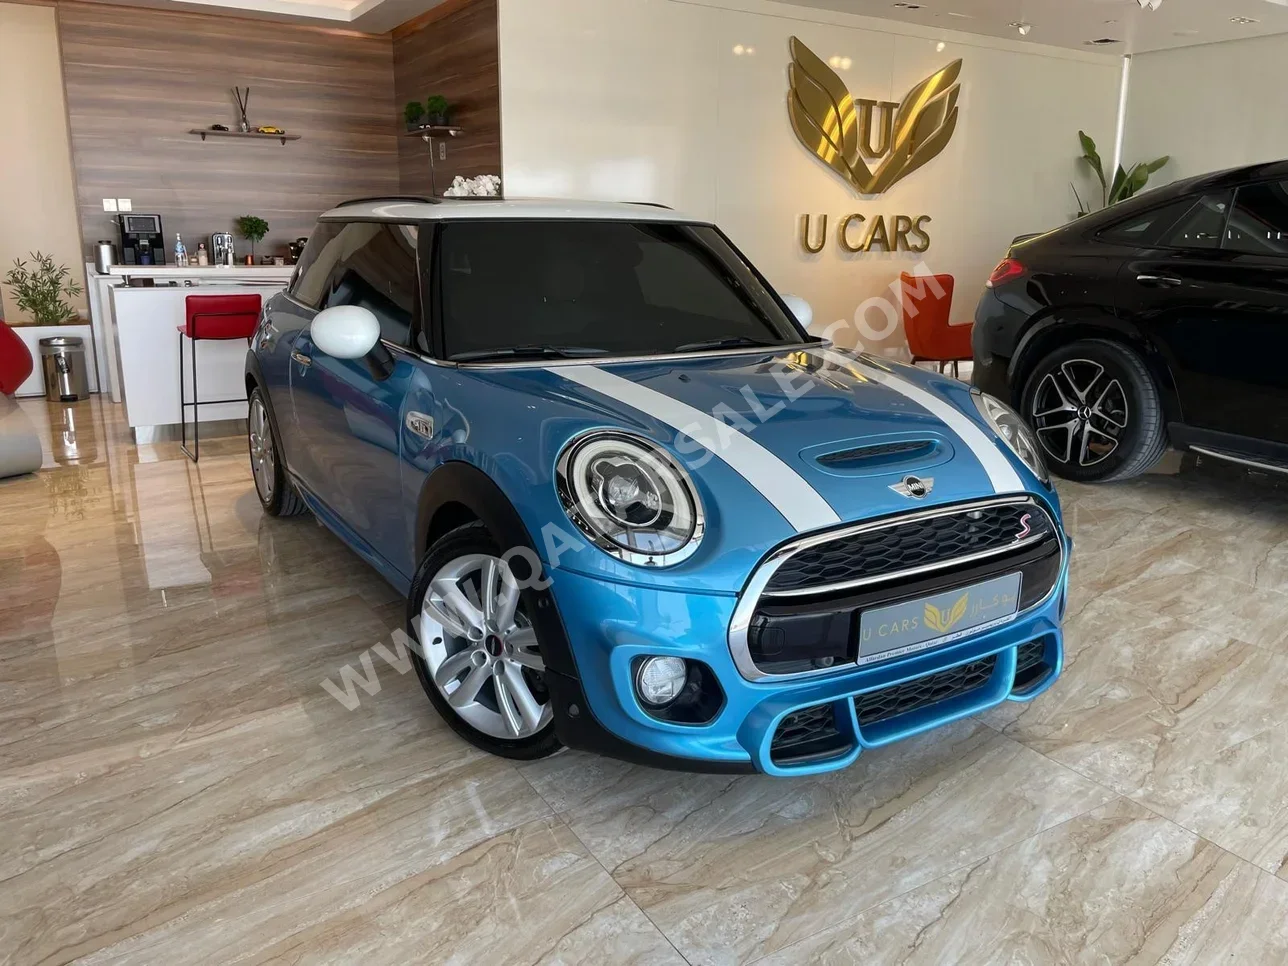 Mini  Cooper  S  2015  Automatic  83,000 Km  4 Cylinder  Front Wheel Drive (FWD)  Hatchback  Blue